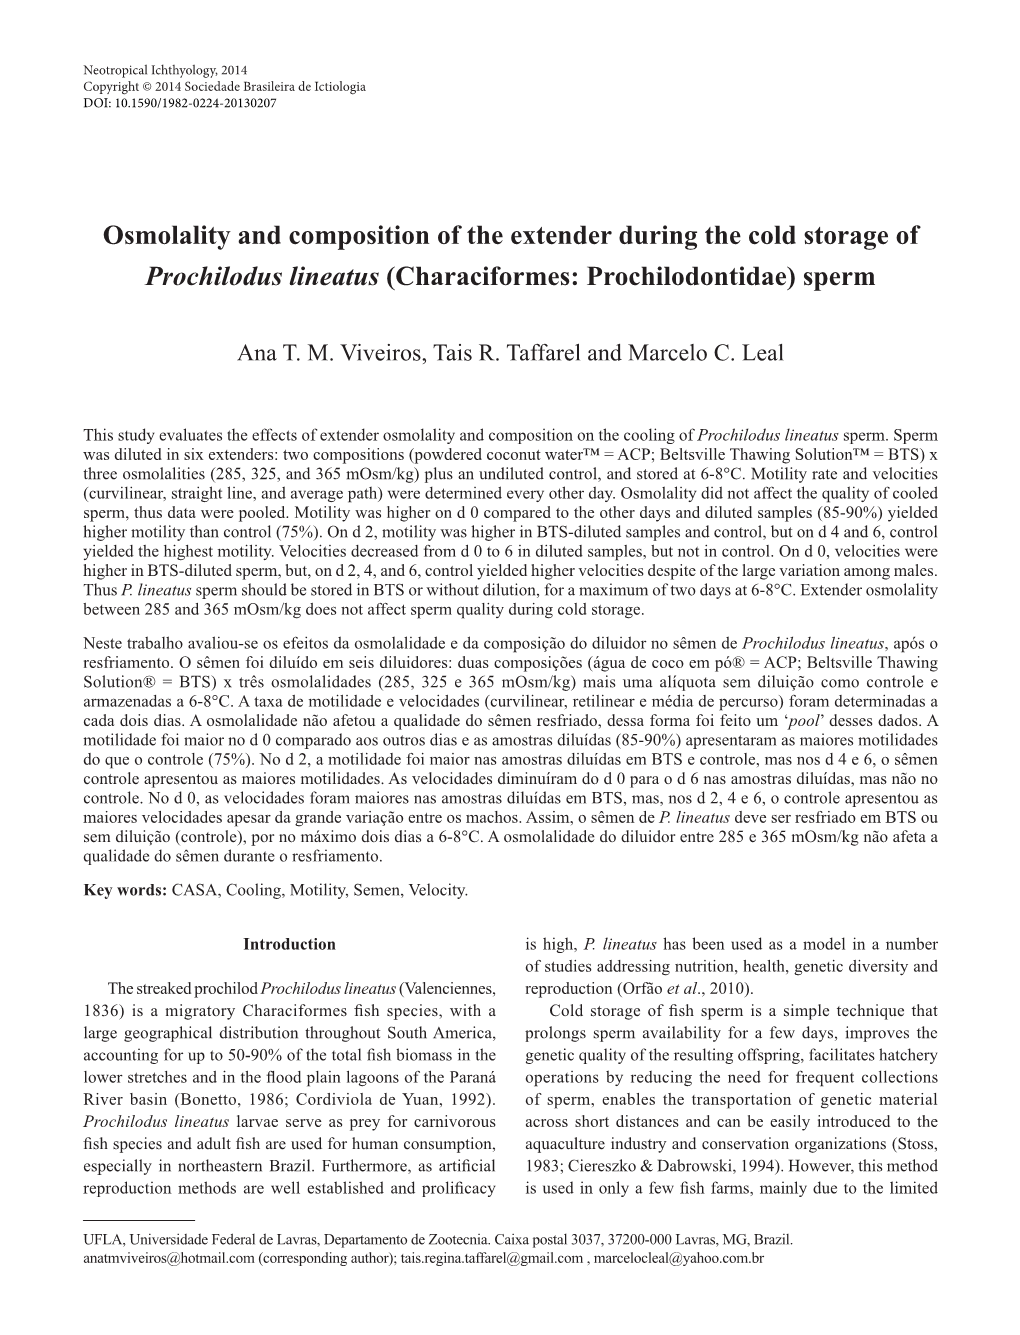 Osmolality and Composition of the Extender During the Cold Storage of Prochilodus Lineatus (Characiformes: Prochilodontidae) Sperm